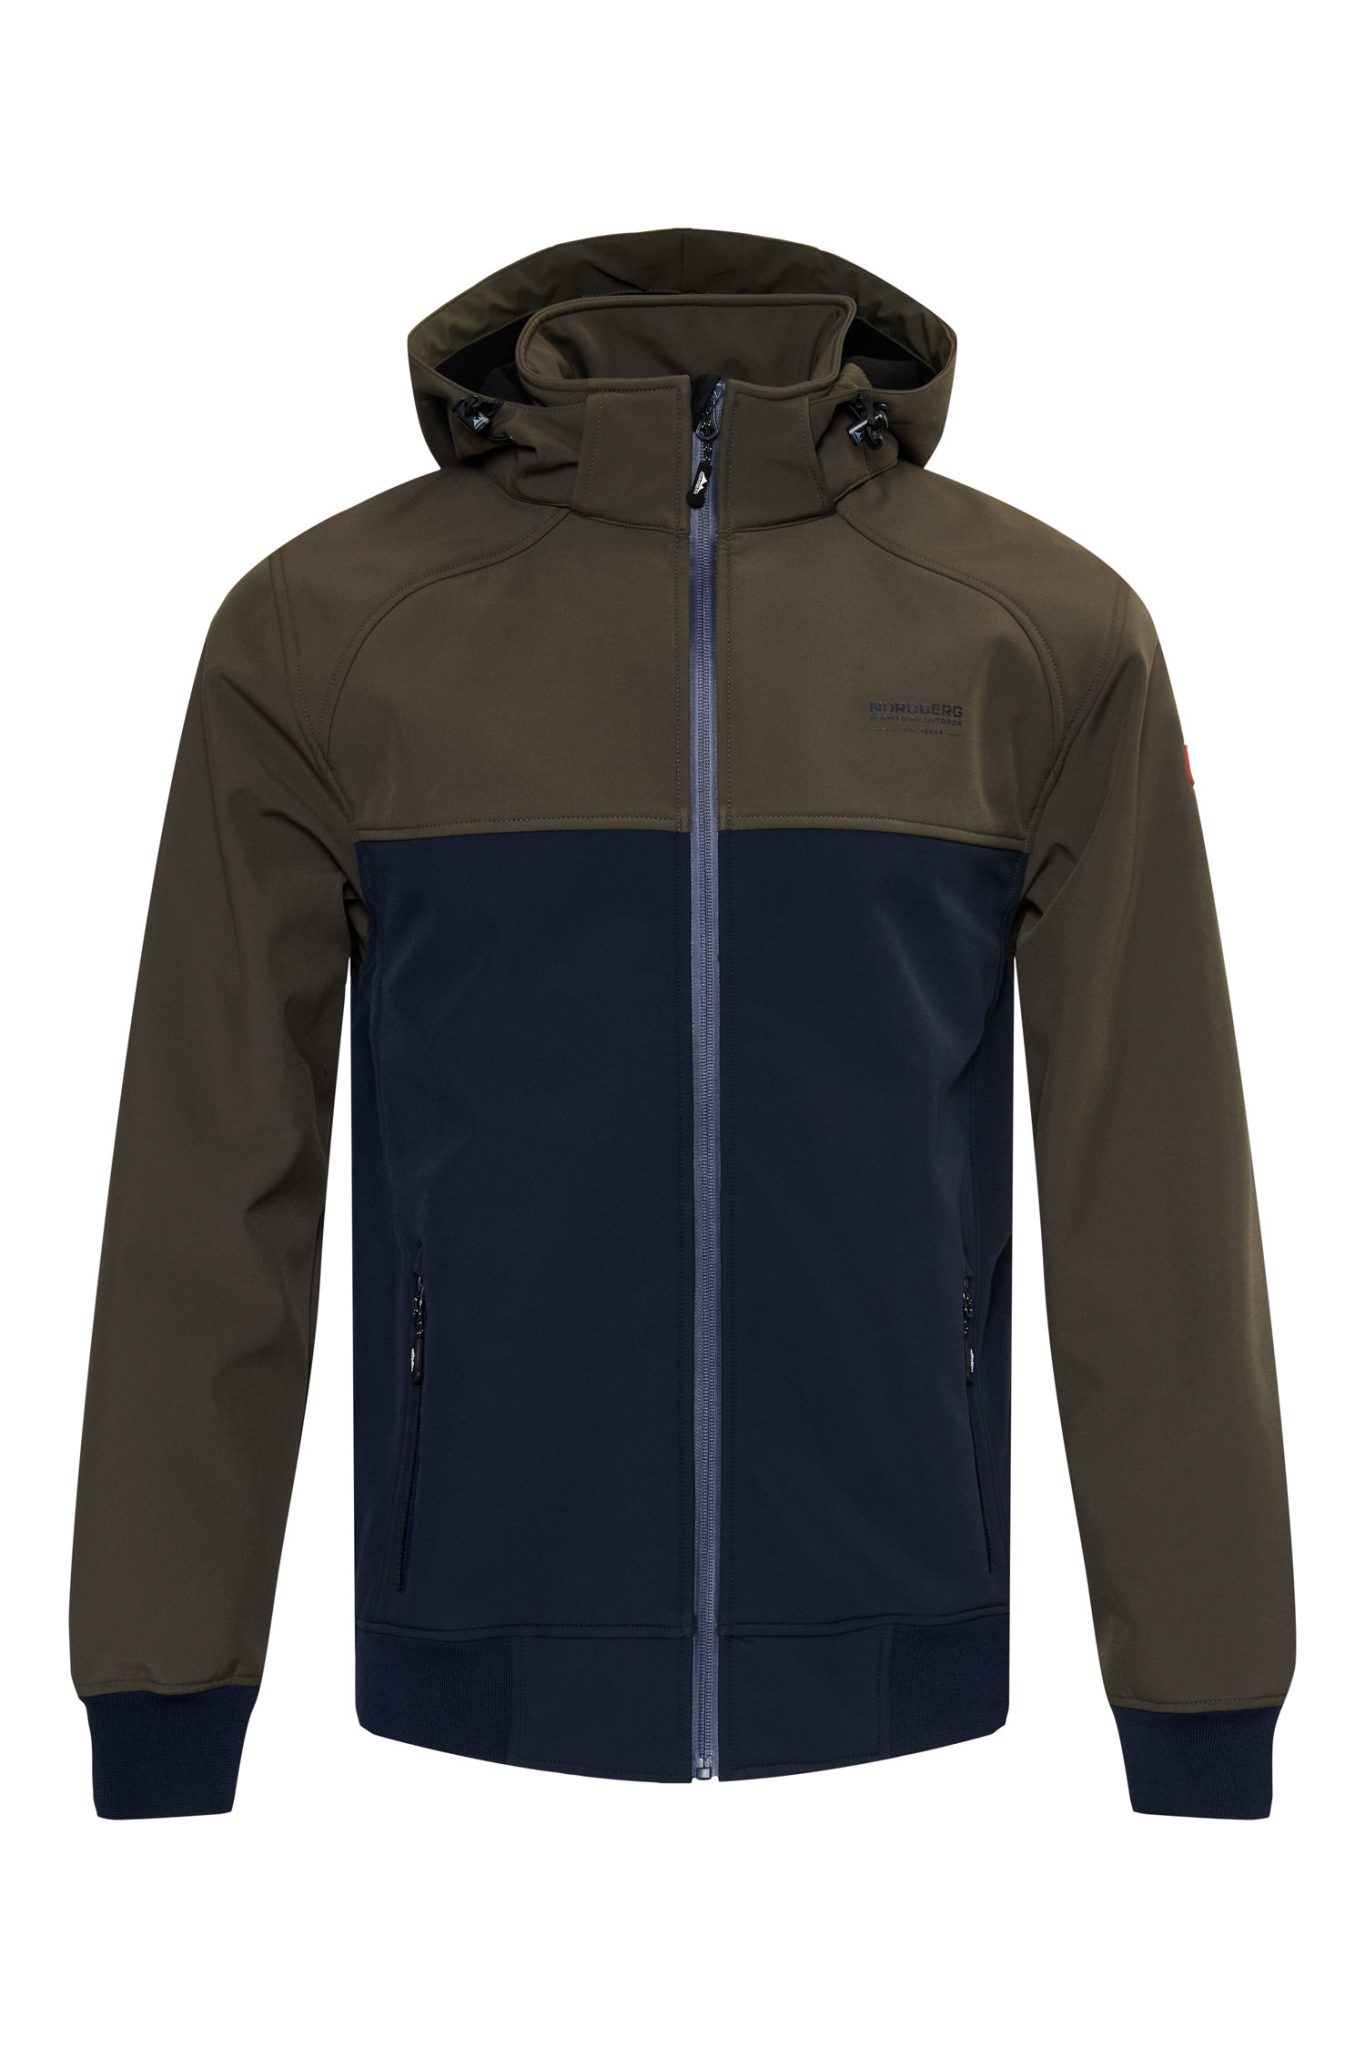 Men's Softshell and Puffy Jackets - Nordberg Outdoor